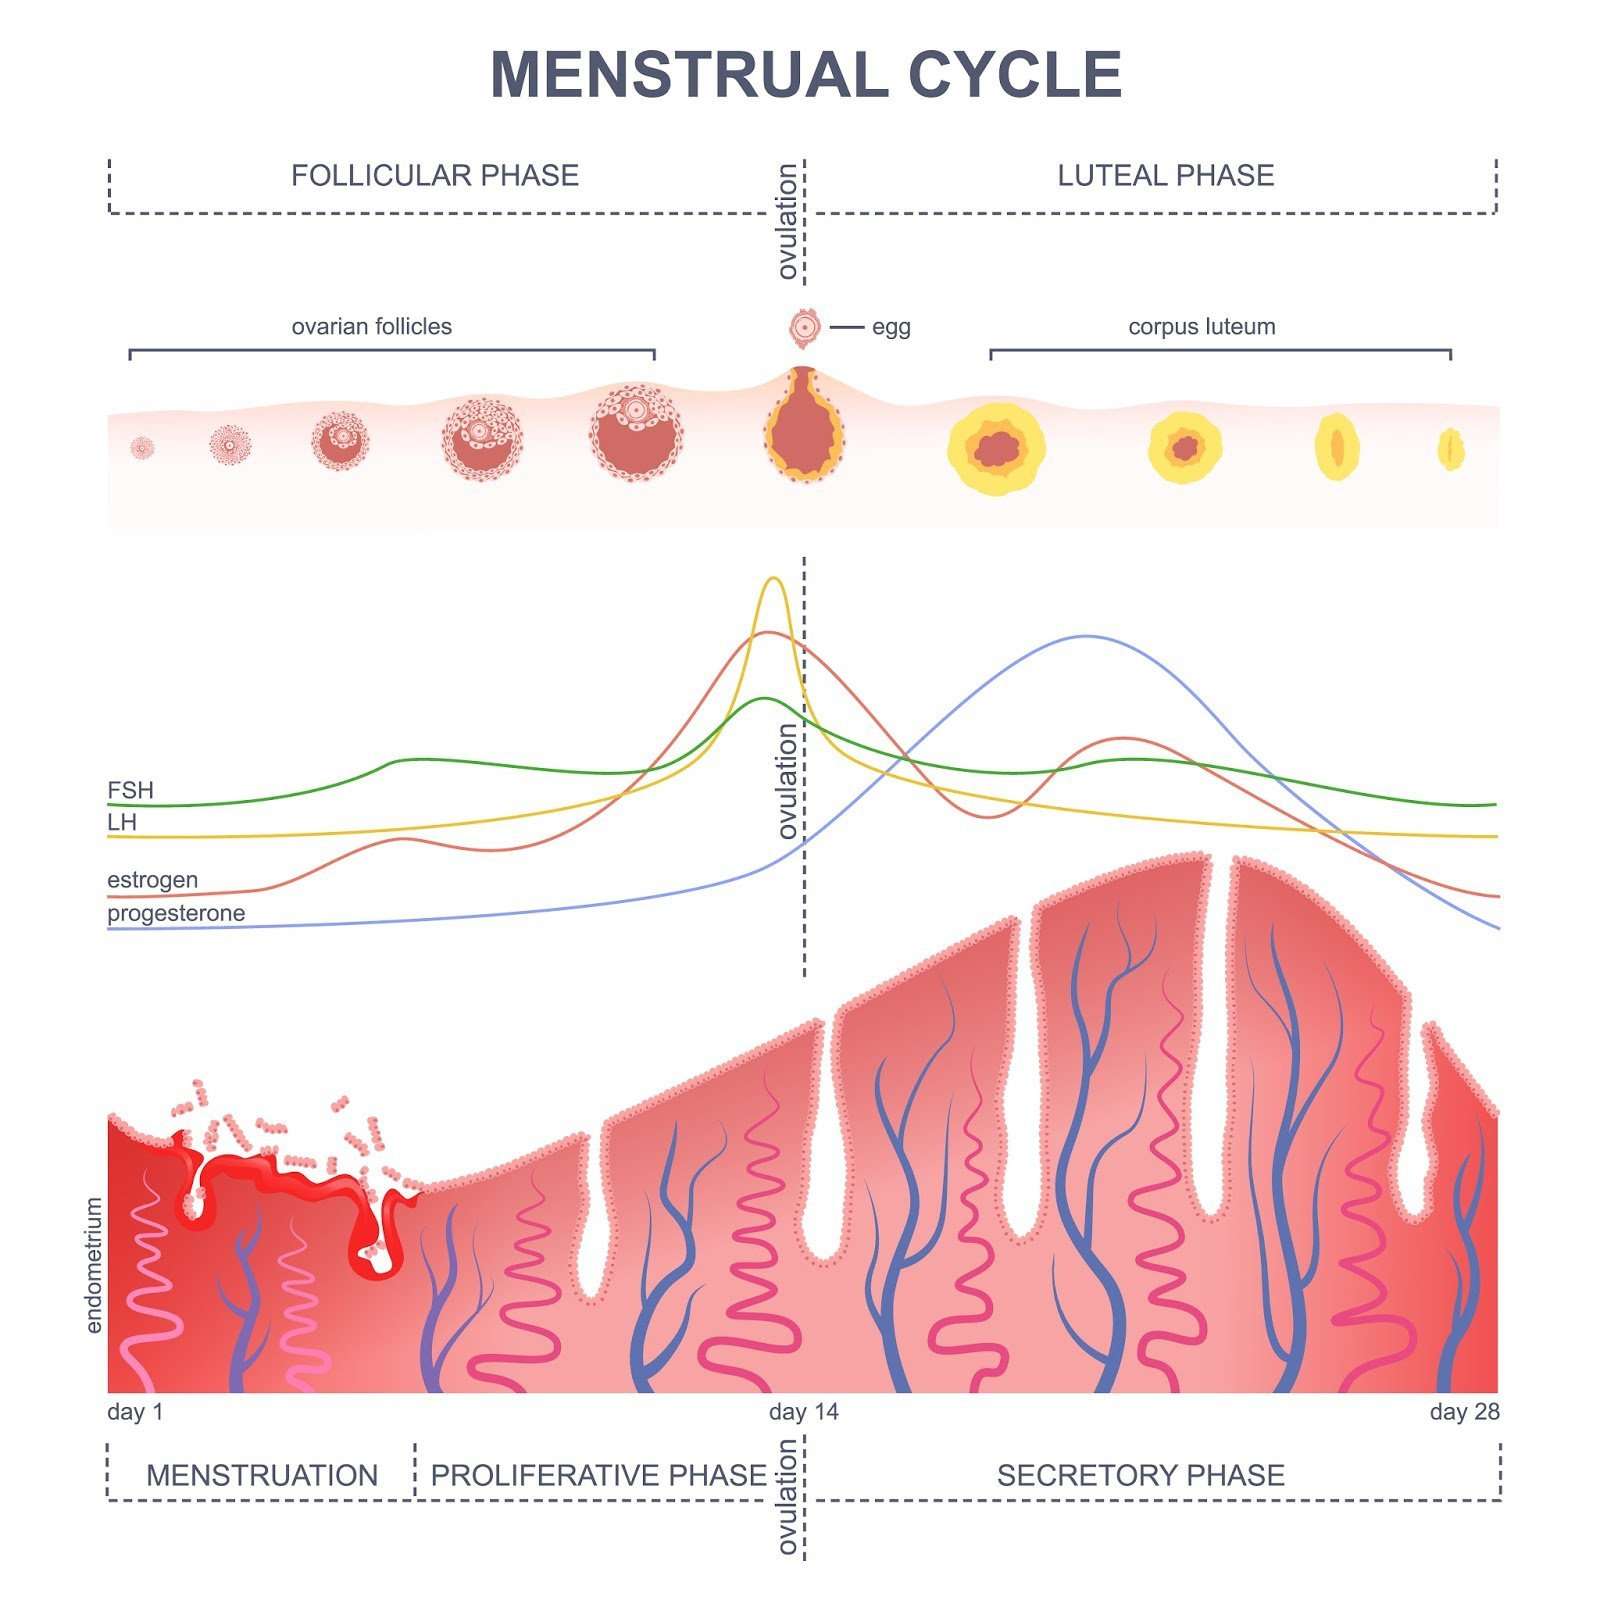 IBS and the menstrual cycle